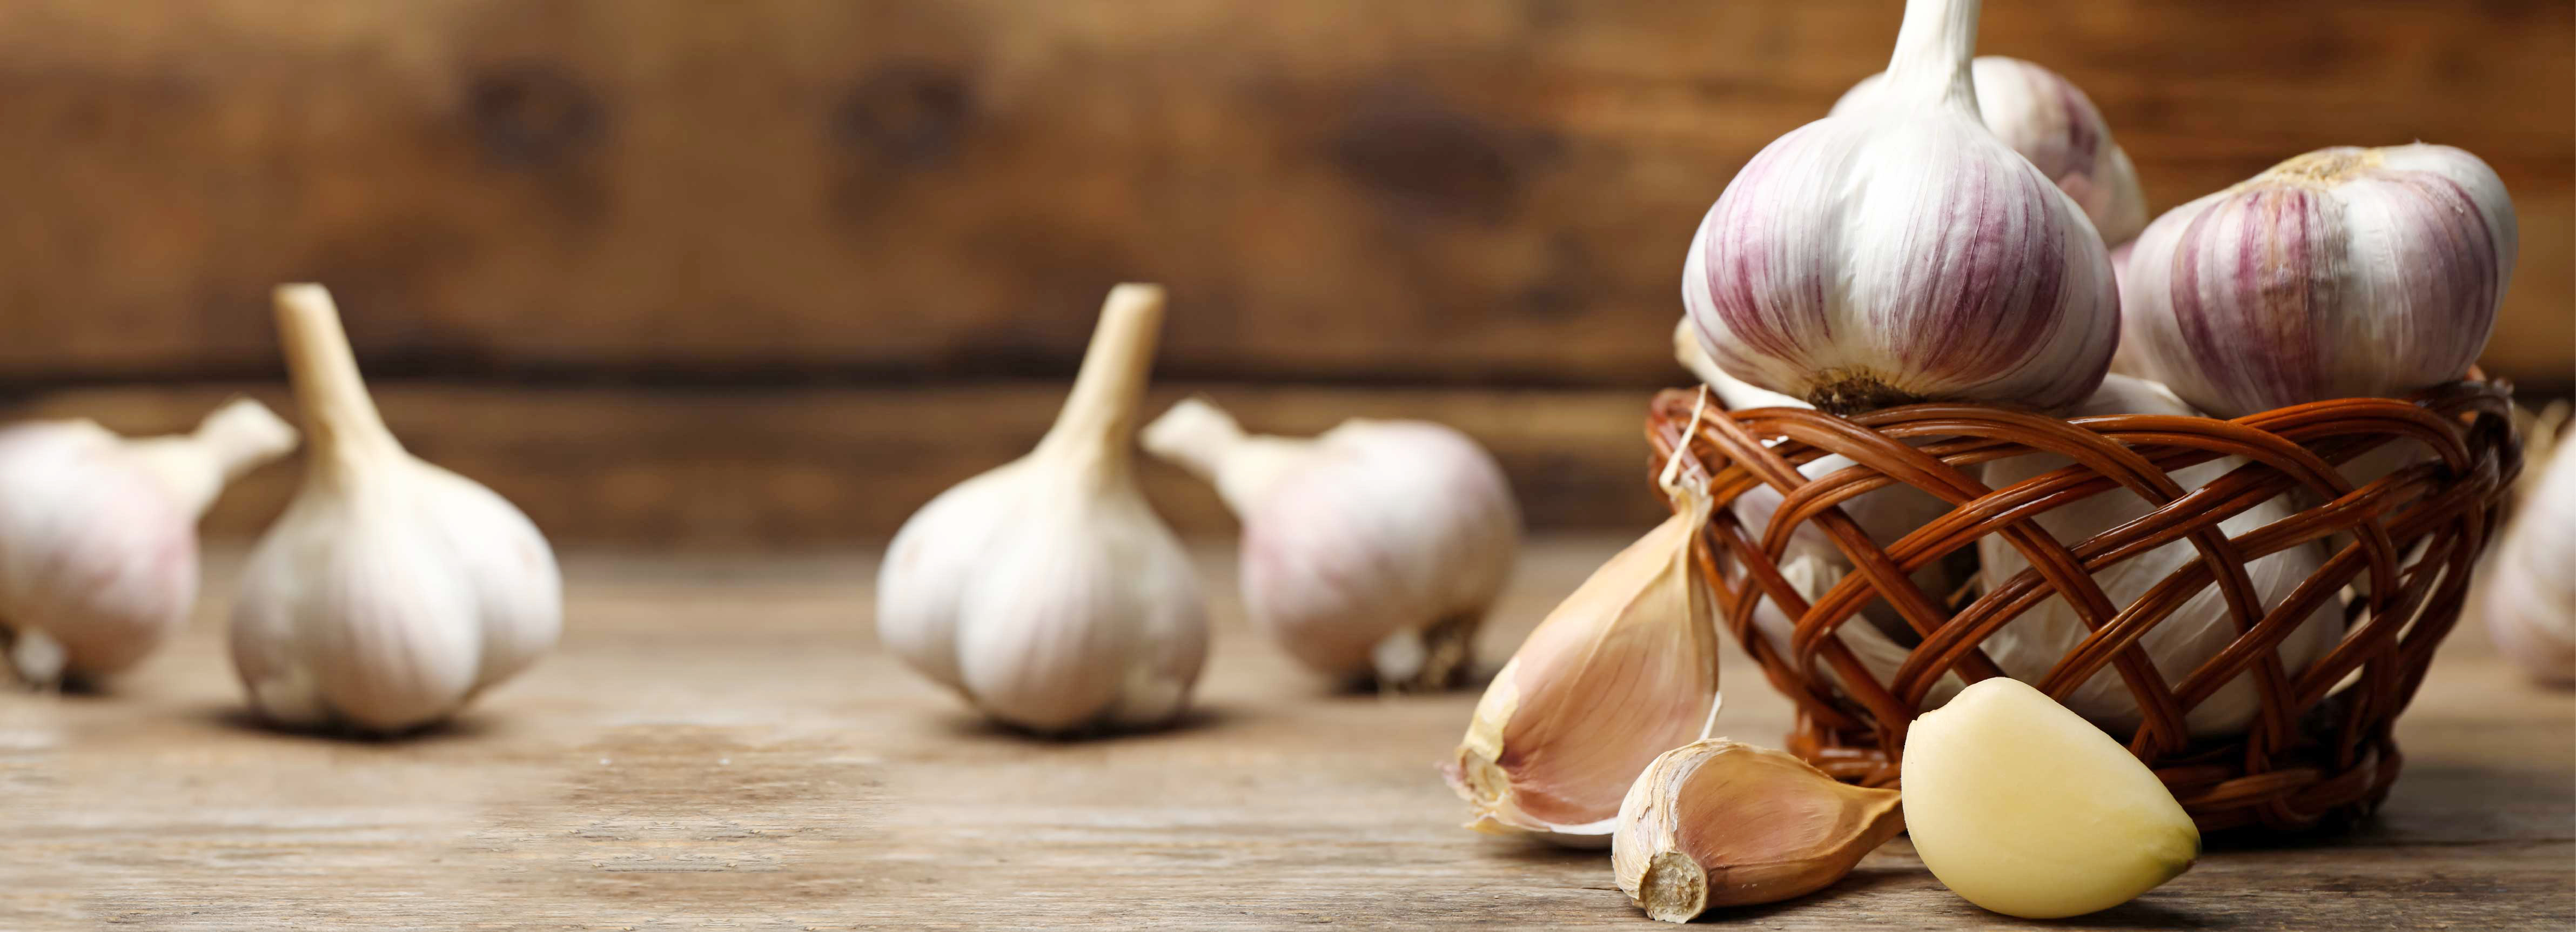 Garlic exhibits antibiotic effects with its compounds sulfoside and allicin. 